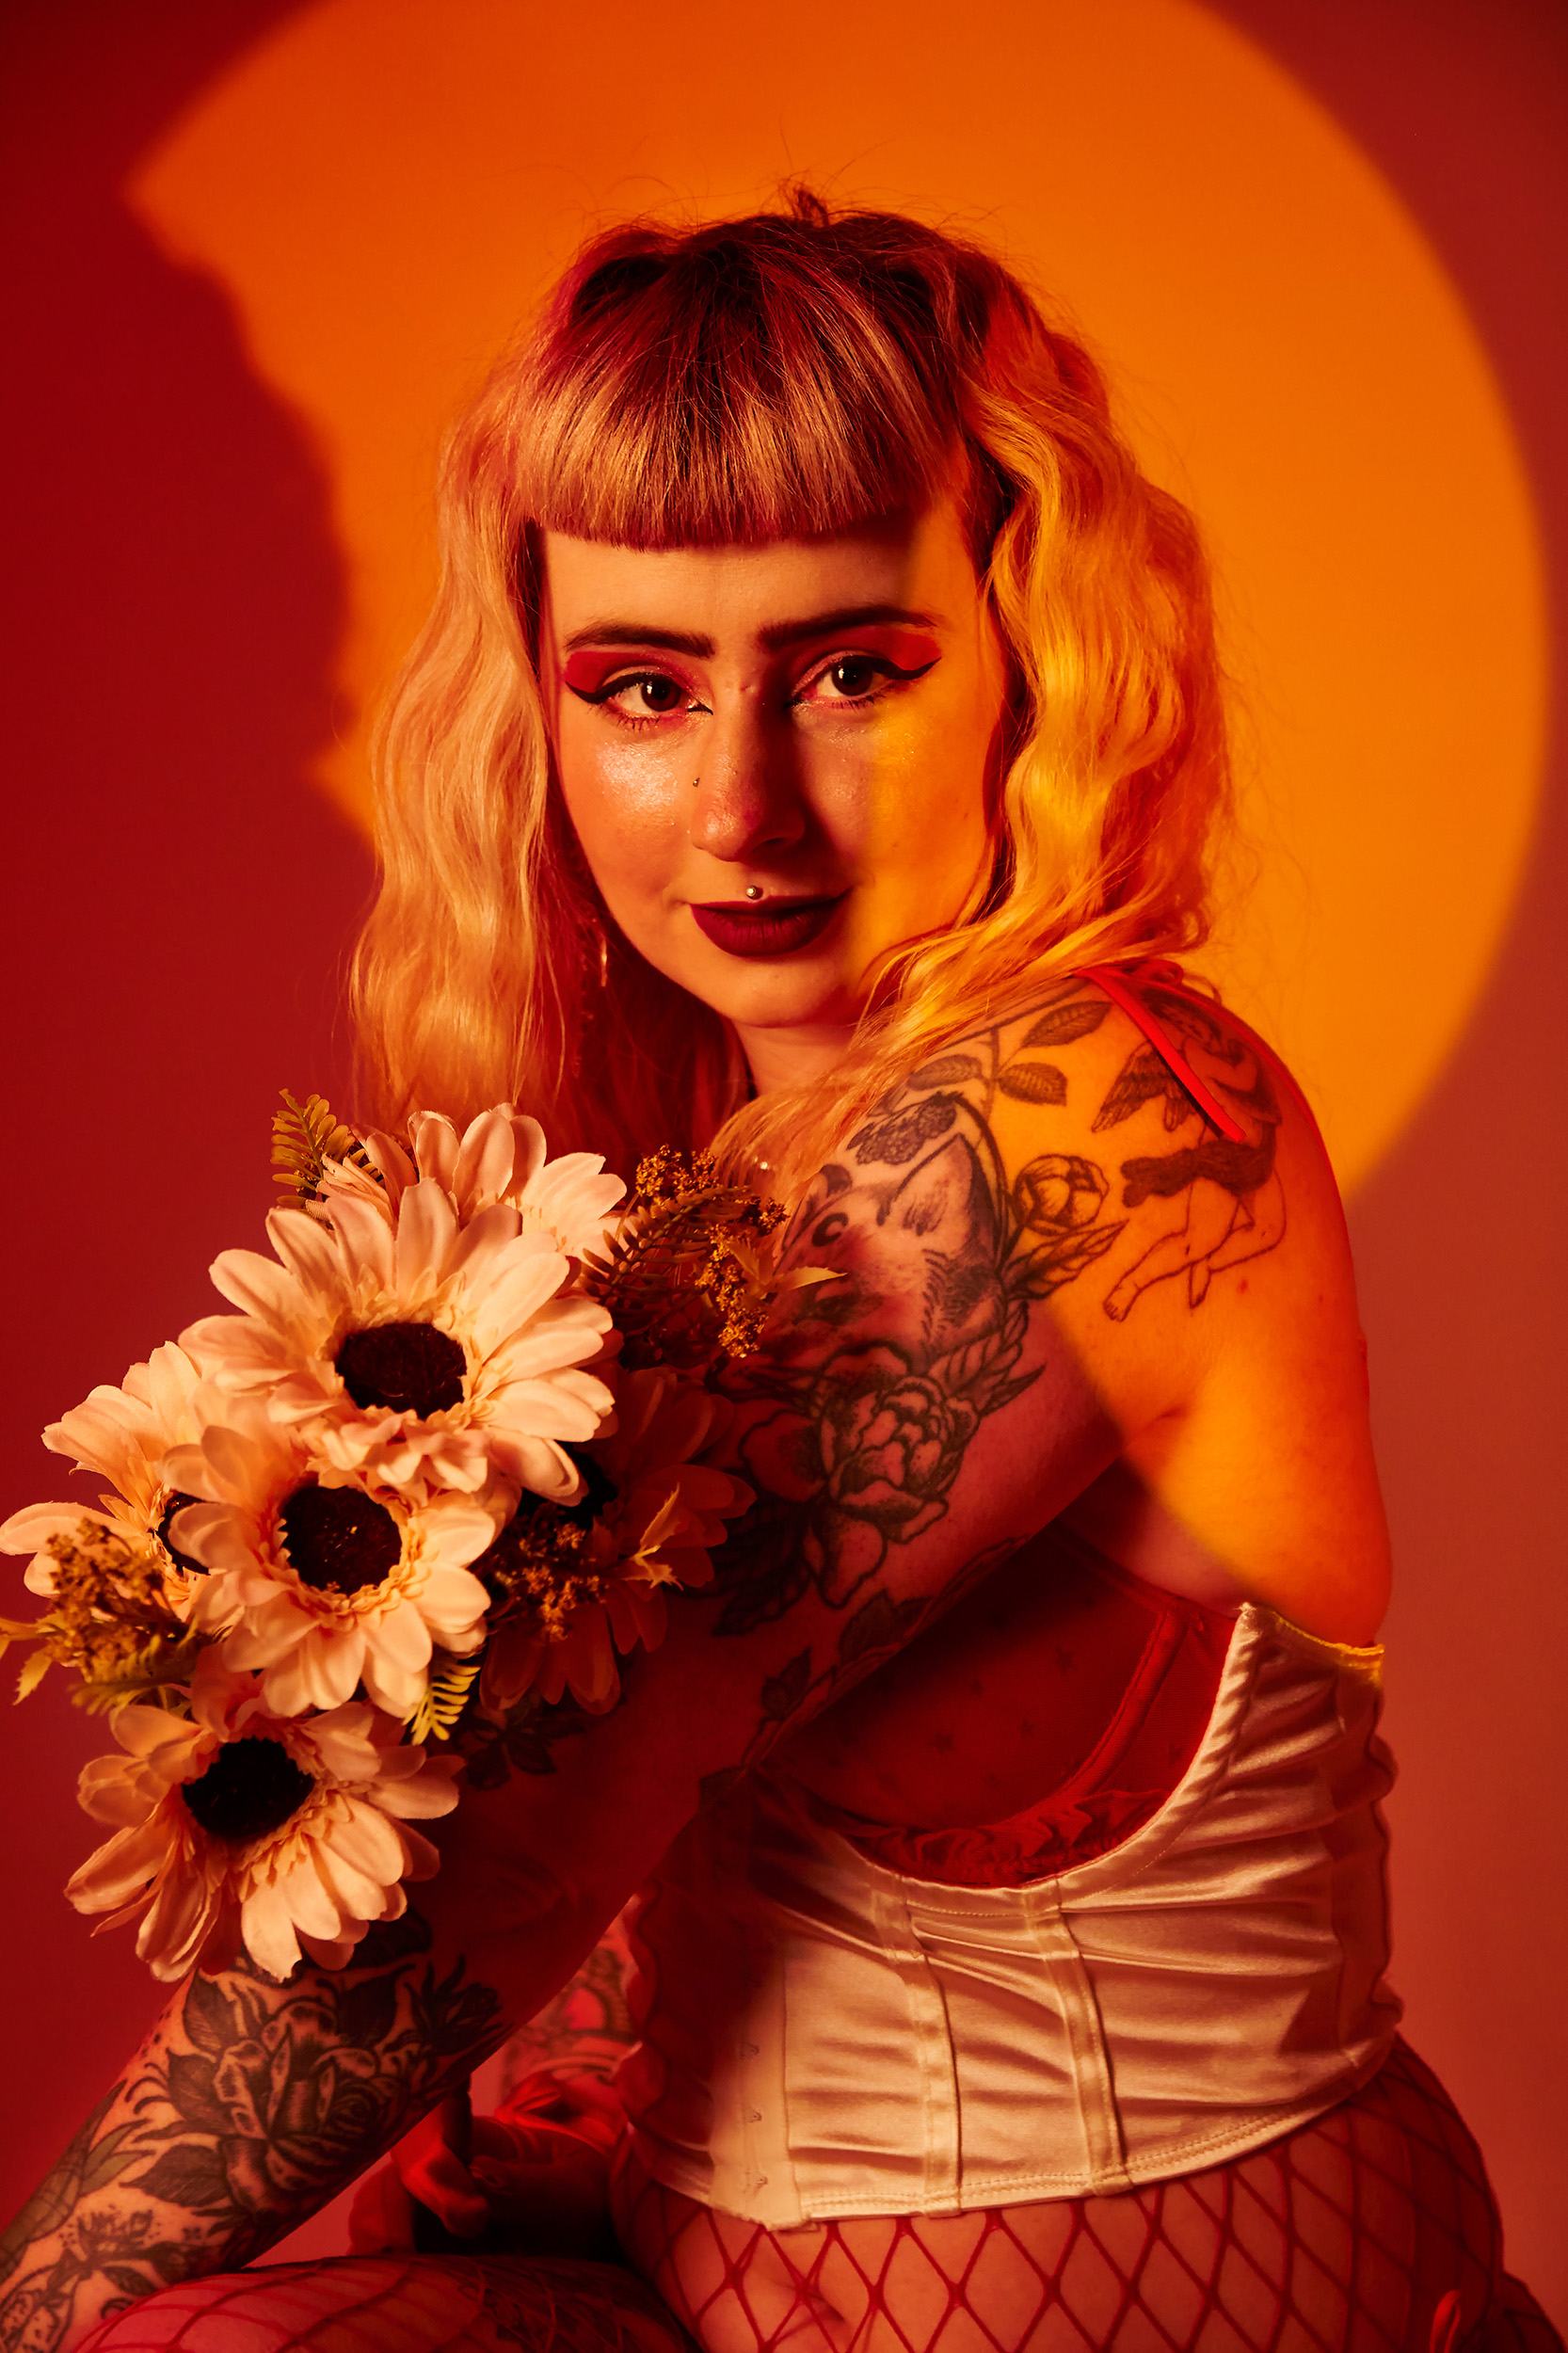 Portrait Photography by Chloe Sibley, showing a burlesque performer holding a bunch of flowers, looking straight down the lens with an orange and red spotlight encasing her.